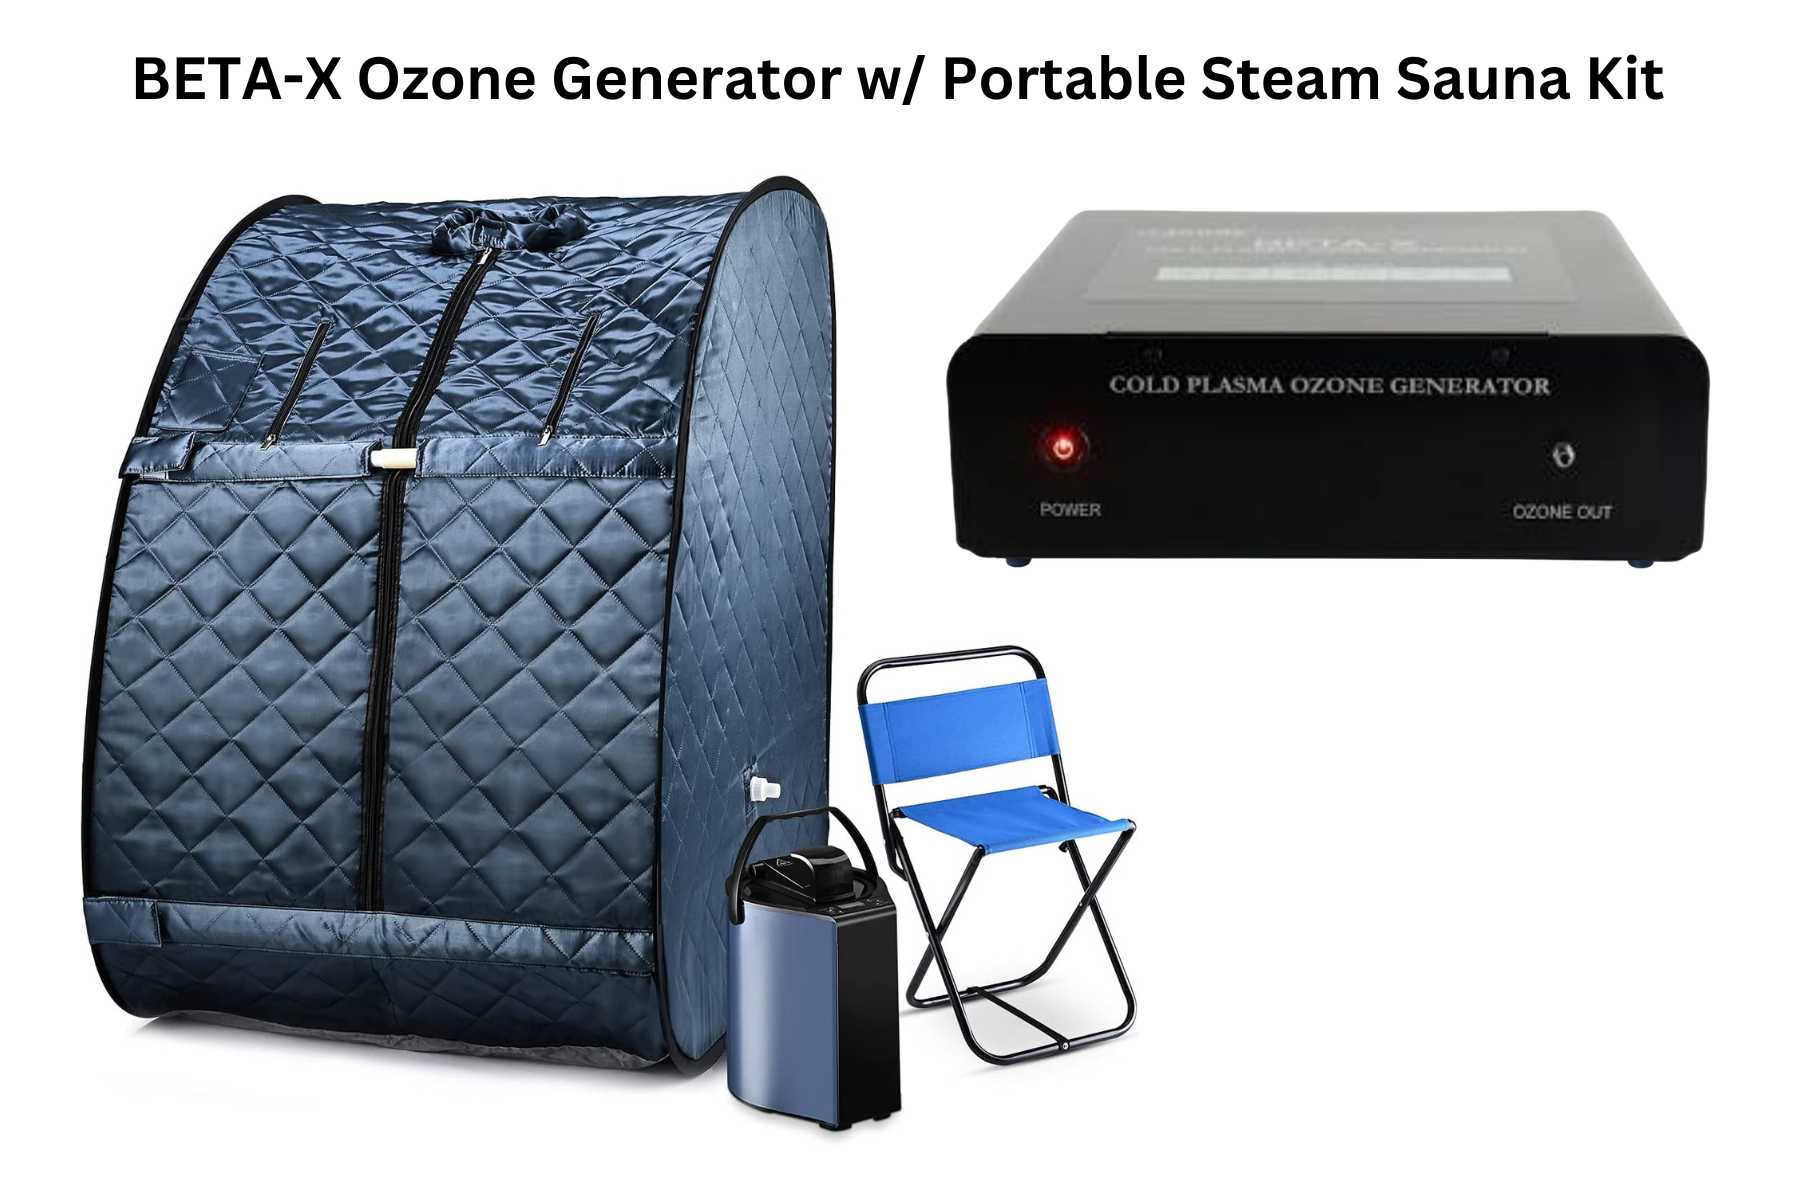 Home Portable Ozone Therapy Steam Sauna includes BETA-X Ozone Generator with TESLA Technology™